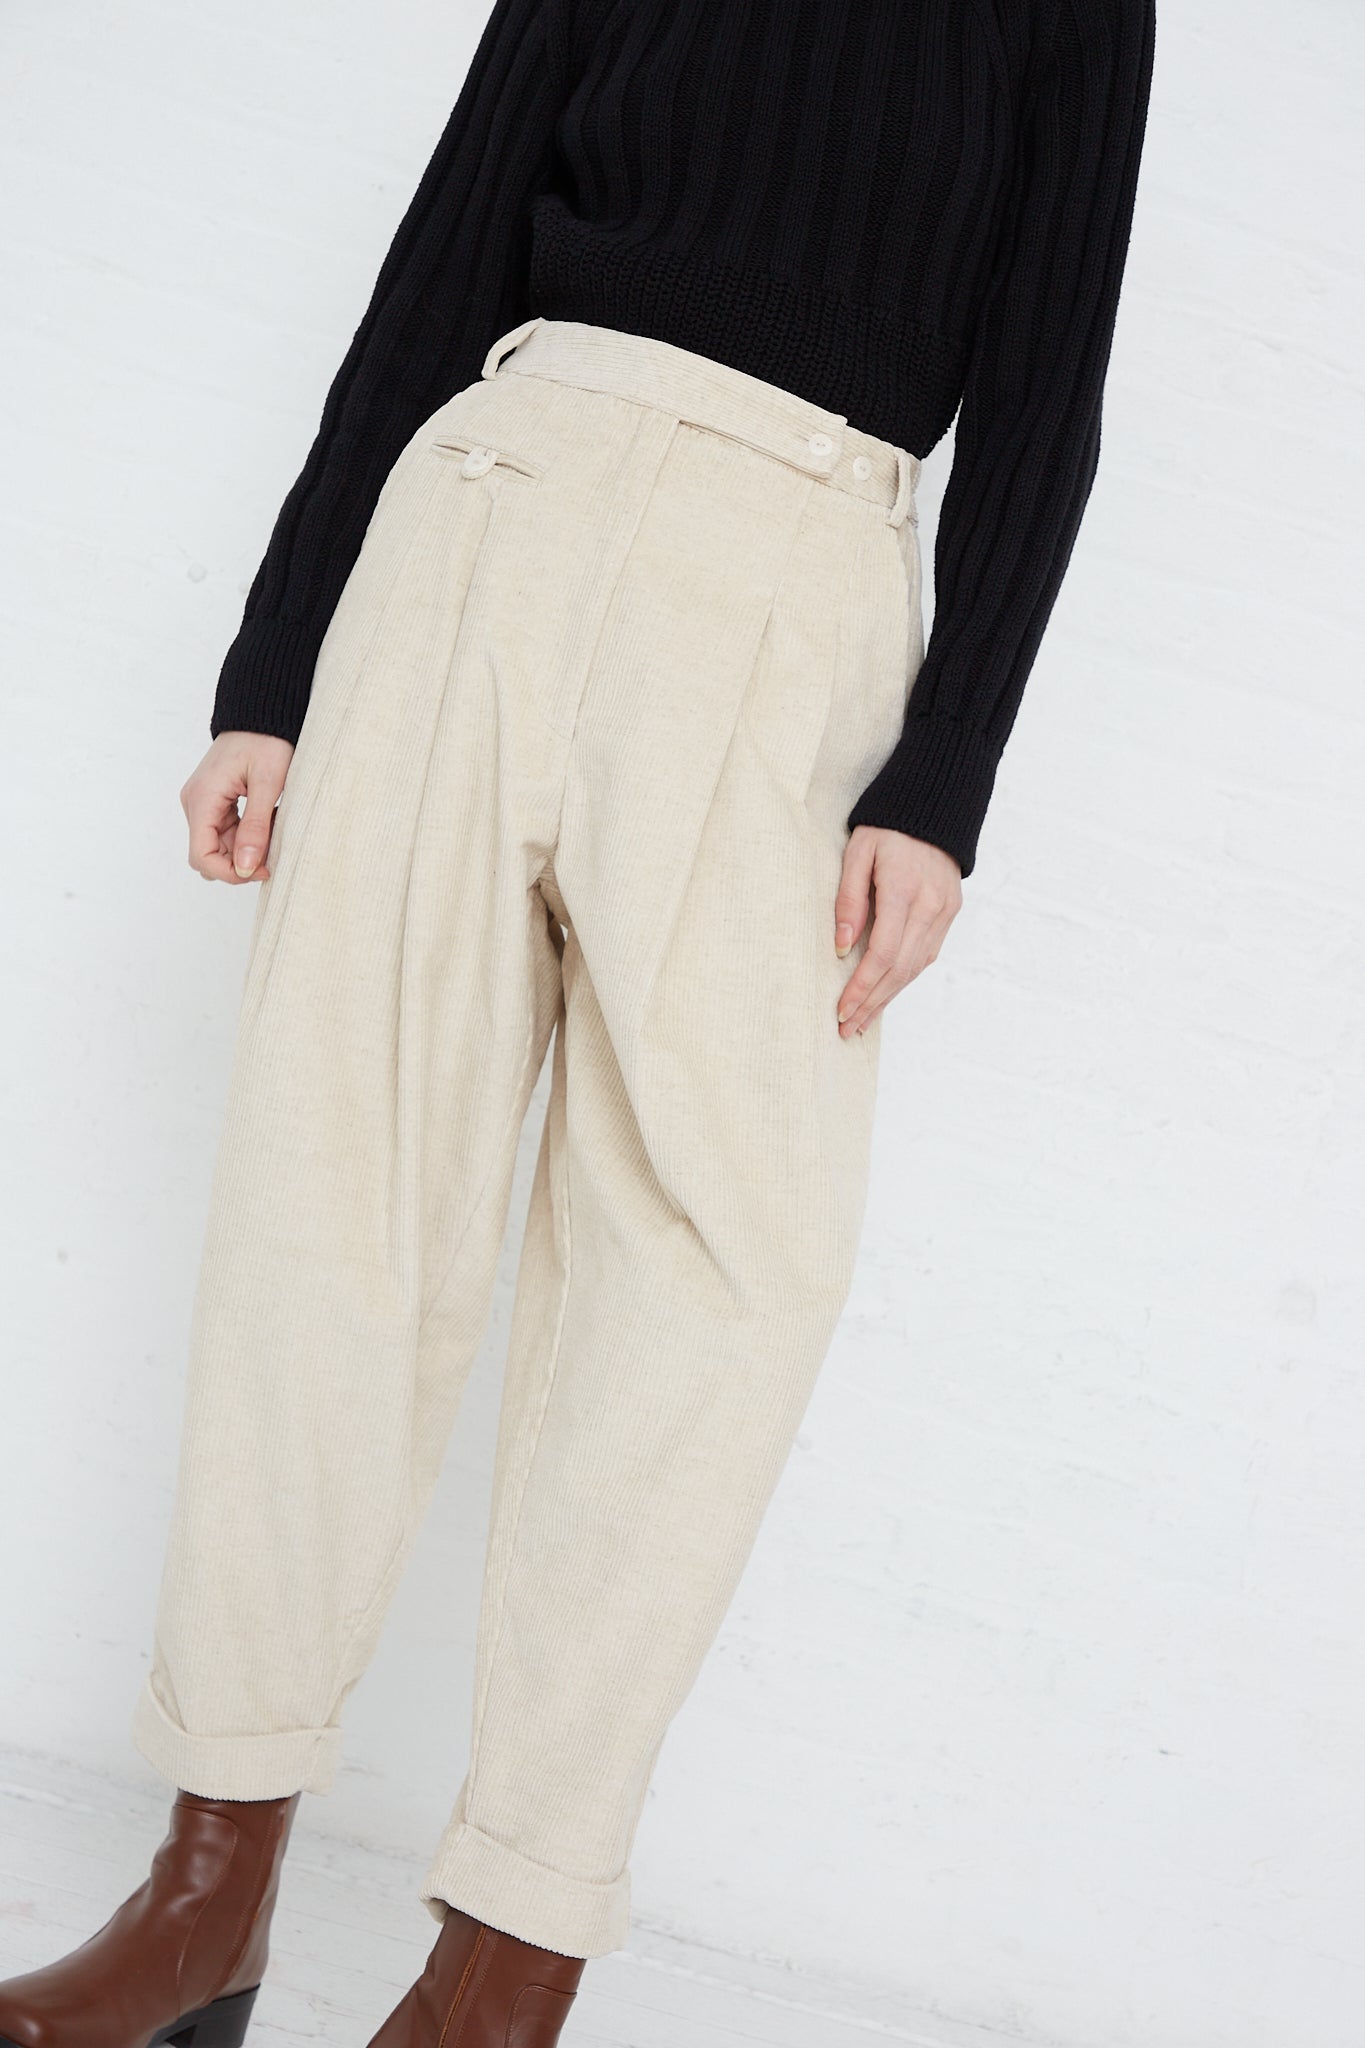 The model is wearing Corduroy Carrot Pants in Off White, made by Cordera.